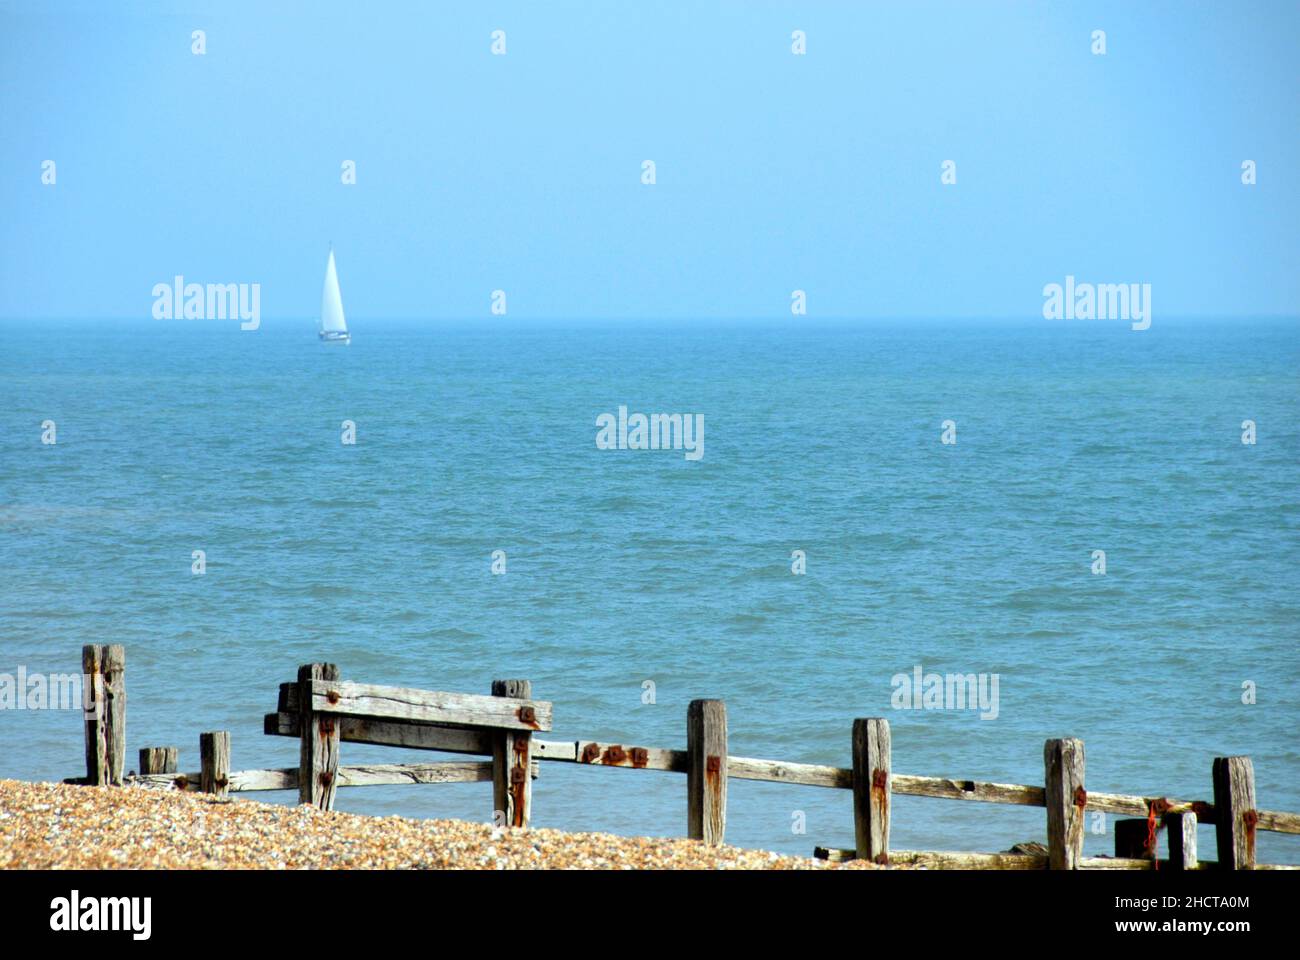 Lone yacht with white sail, Bermuda rig, sailing in the English Channel off Pevensey Bay, East Sussex, England and old wooden breakwater in foreground Stock Photo